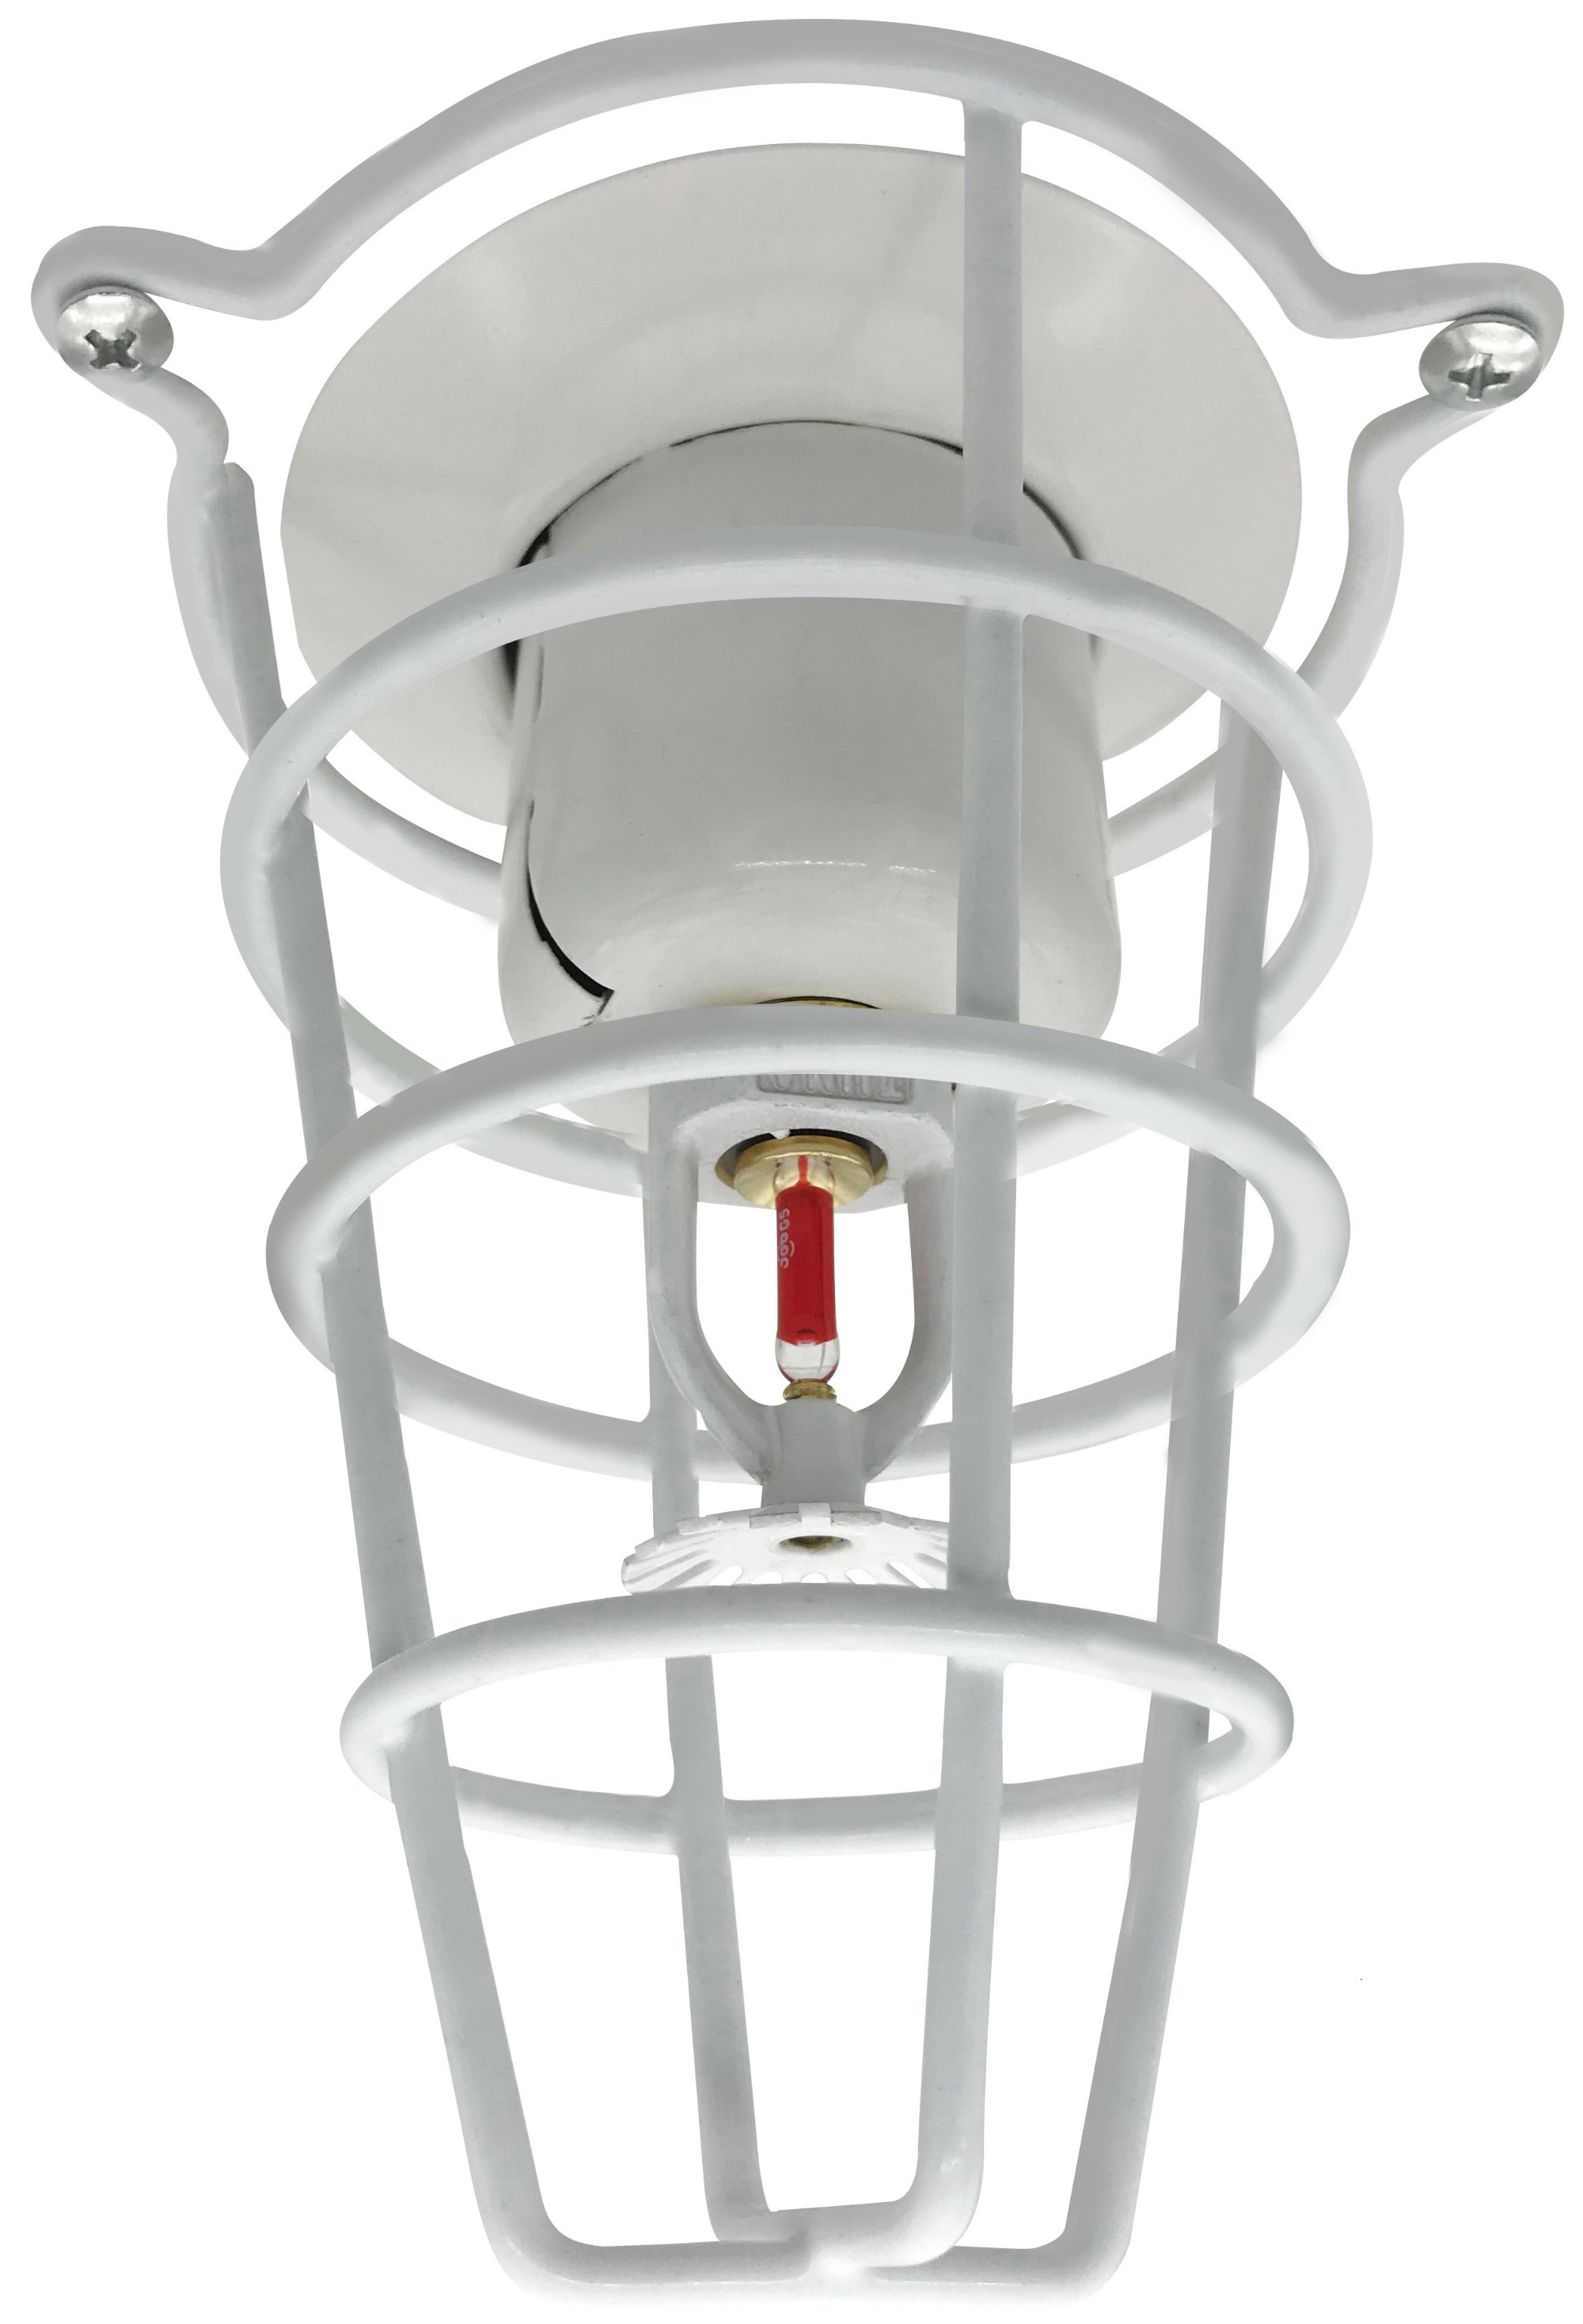 White Fire Sprinkler Head Guard Cover for Both 1//2 /& 3//4 Fire Head for Protecting Flush Mount /& Side Wall /& Pendent Head Semi 2 Pack Recessed Sprinkler Head Cage Happy Tree